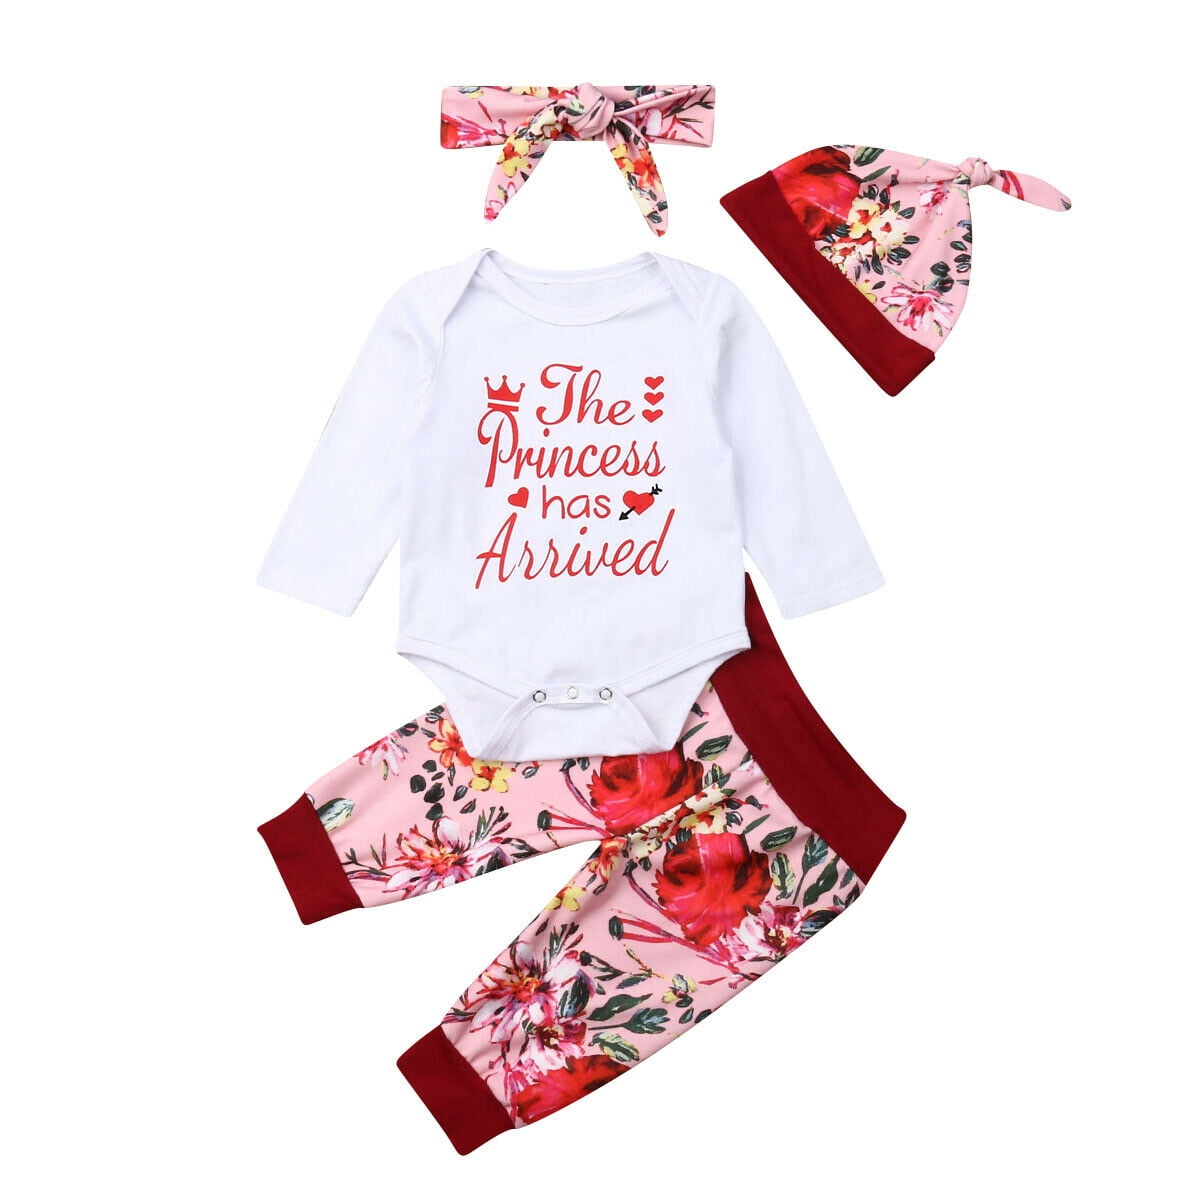 Newborn Baby Girl Romper Tops Jumpsuit Floral Pants Headband Outfit Clothes Set